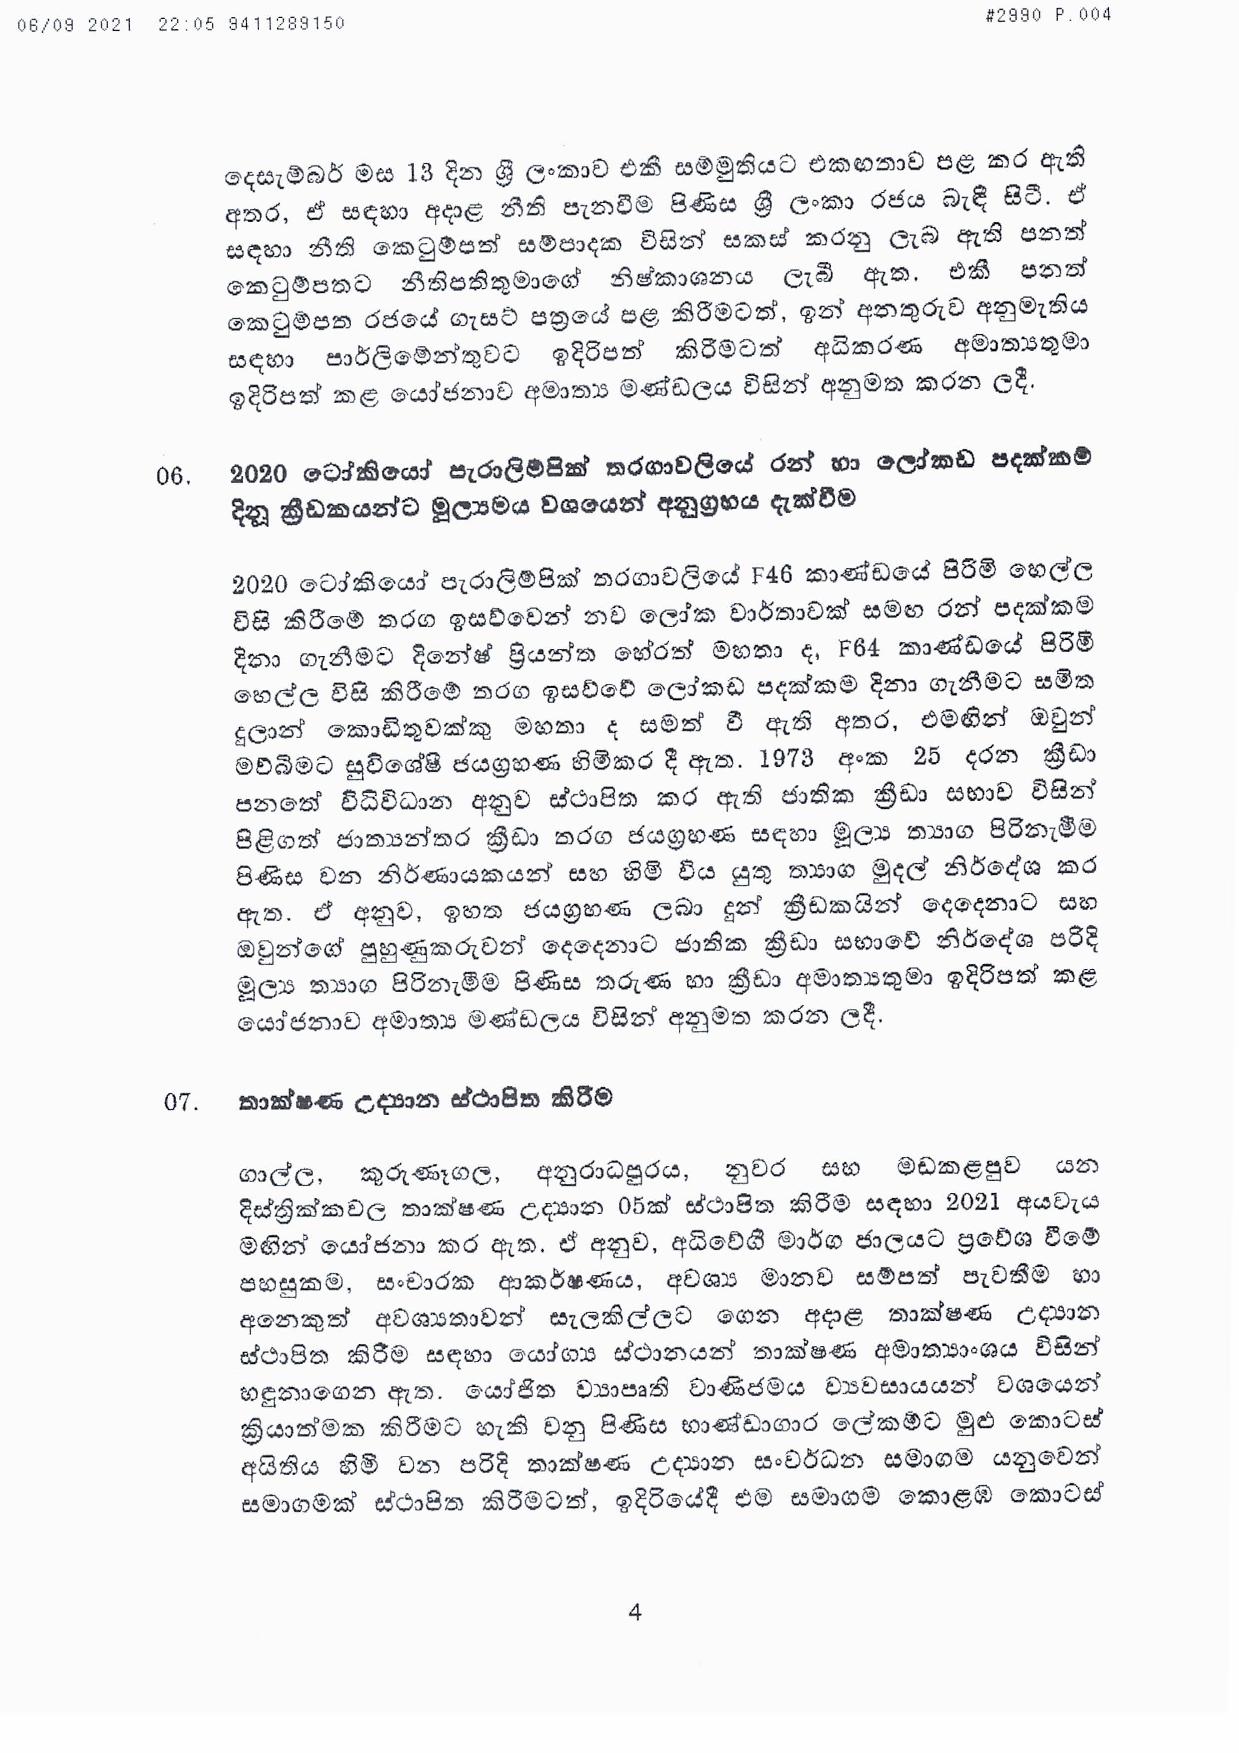 Cabinet Decision on 06.09.2021 Sinhala page 004